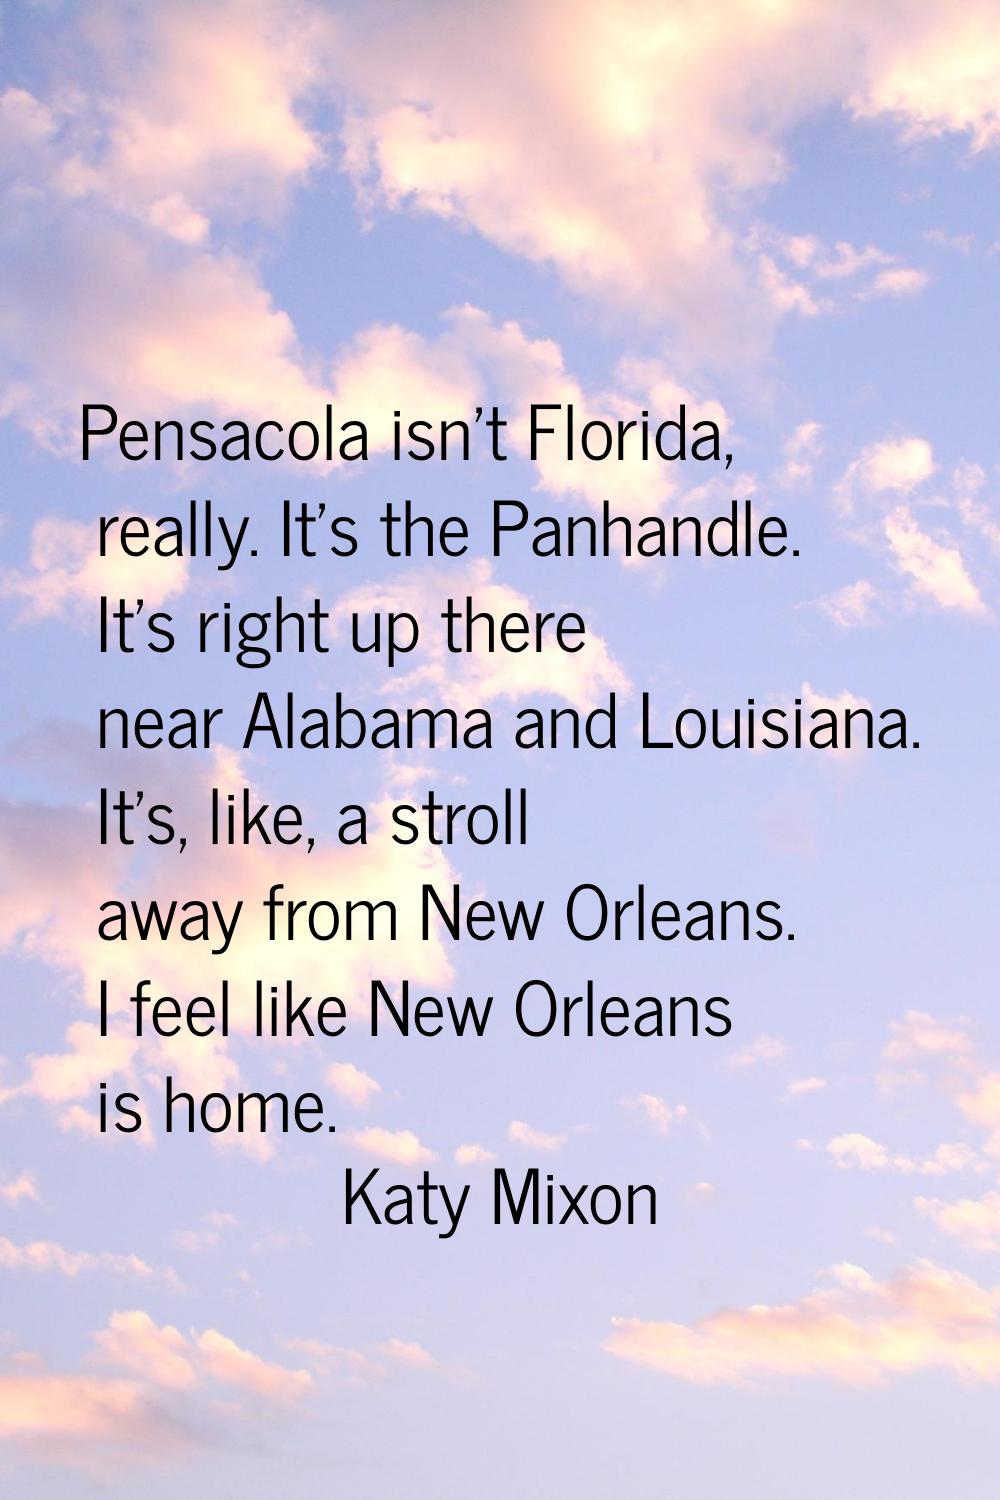 Pensacola isn't Florida, really. It's the Panhandle. It's right up there near Alabama and Louisiana